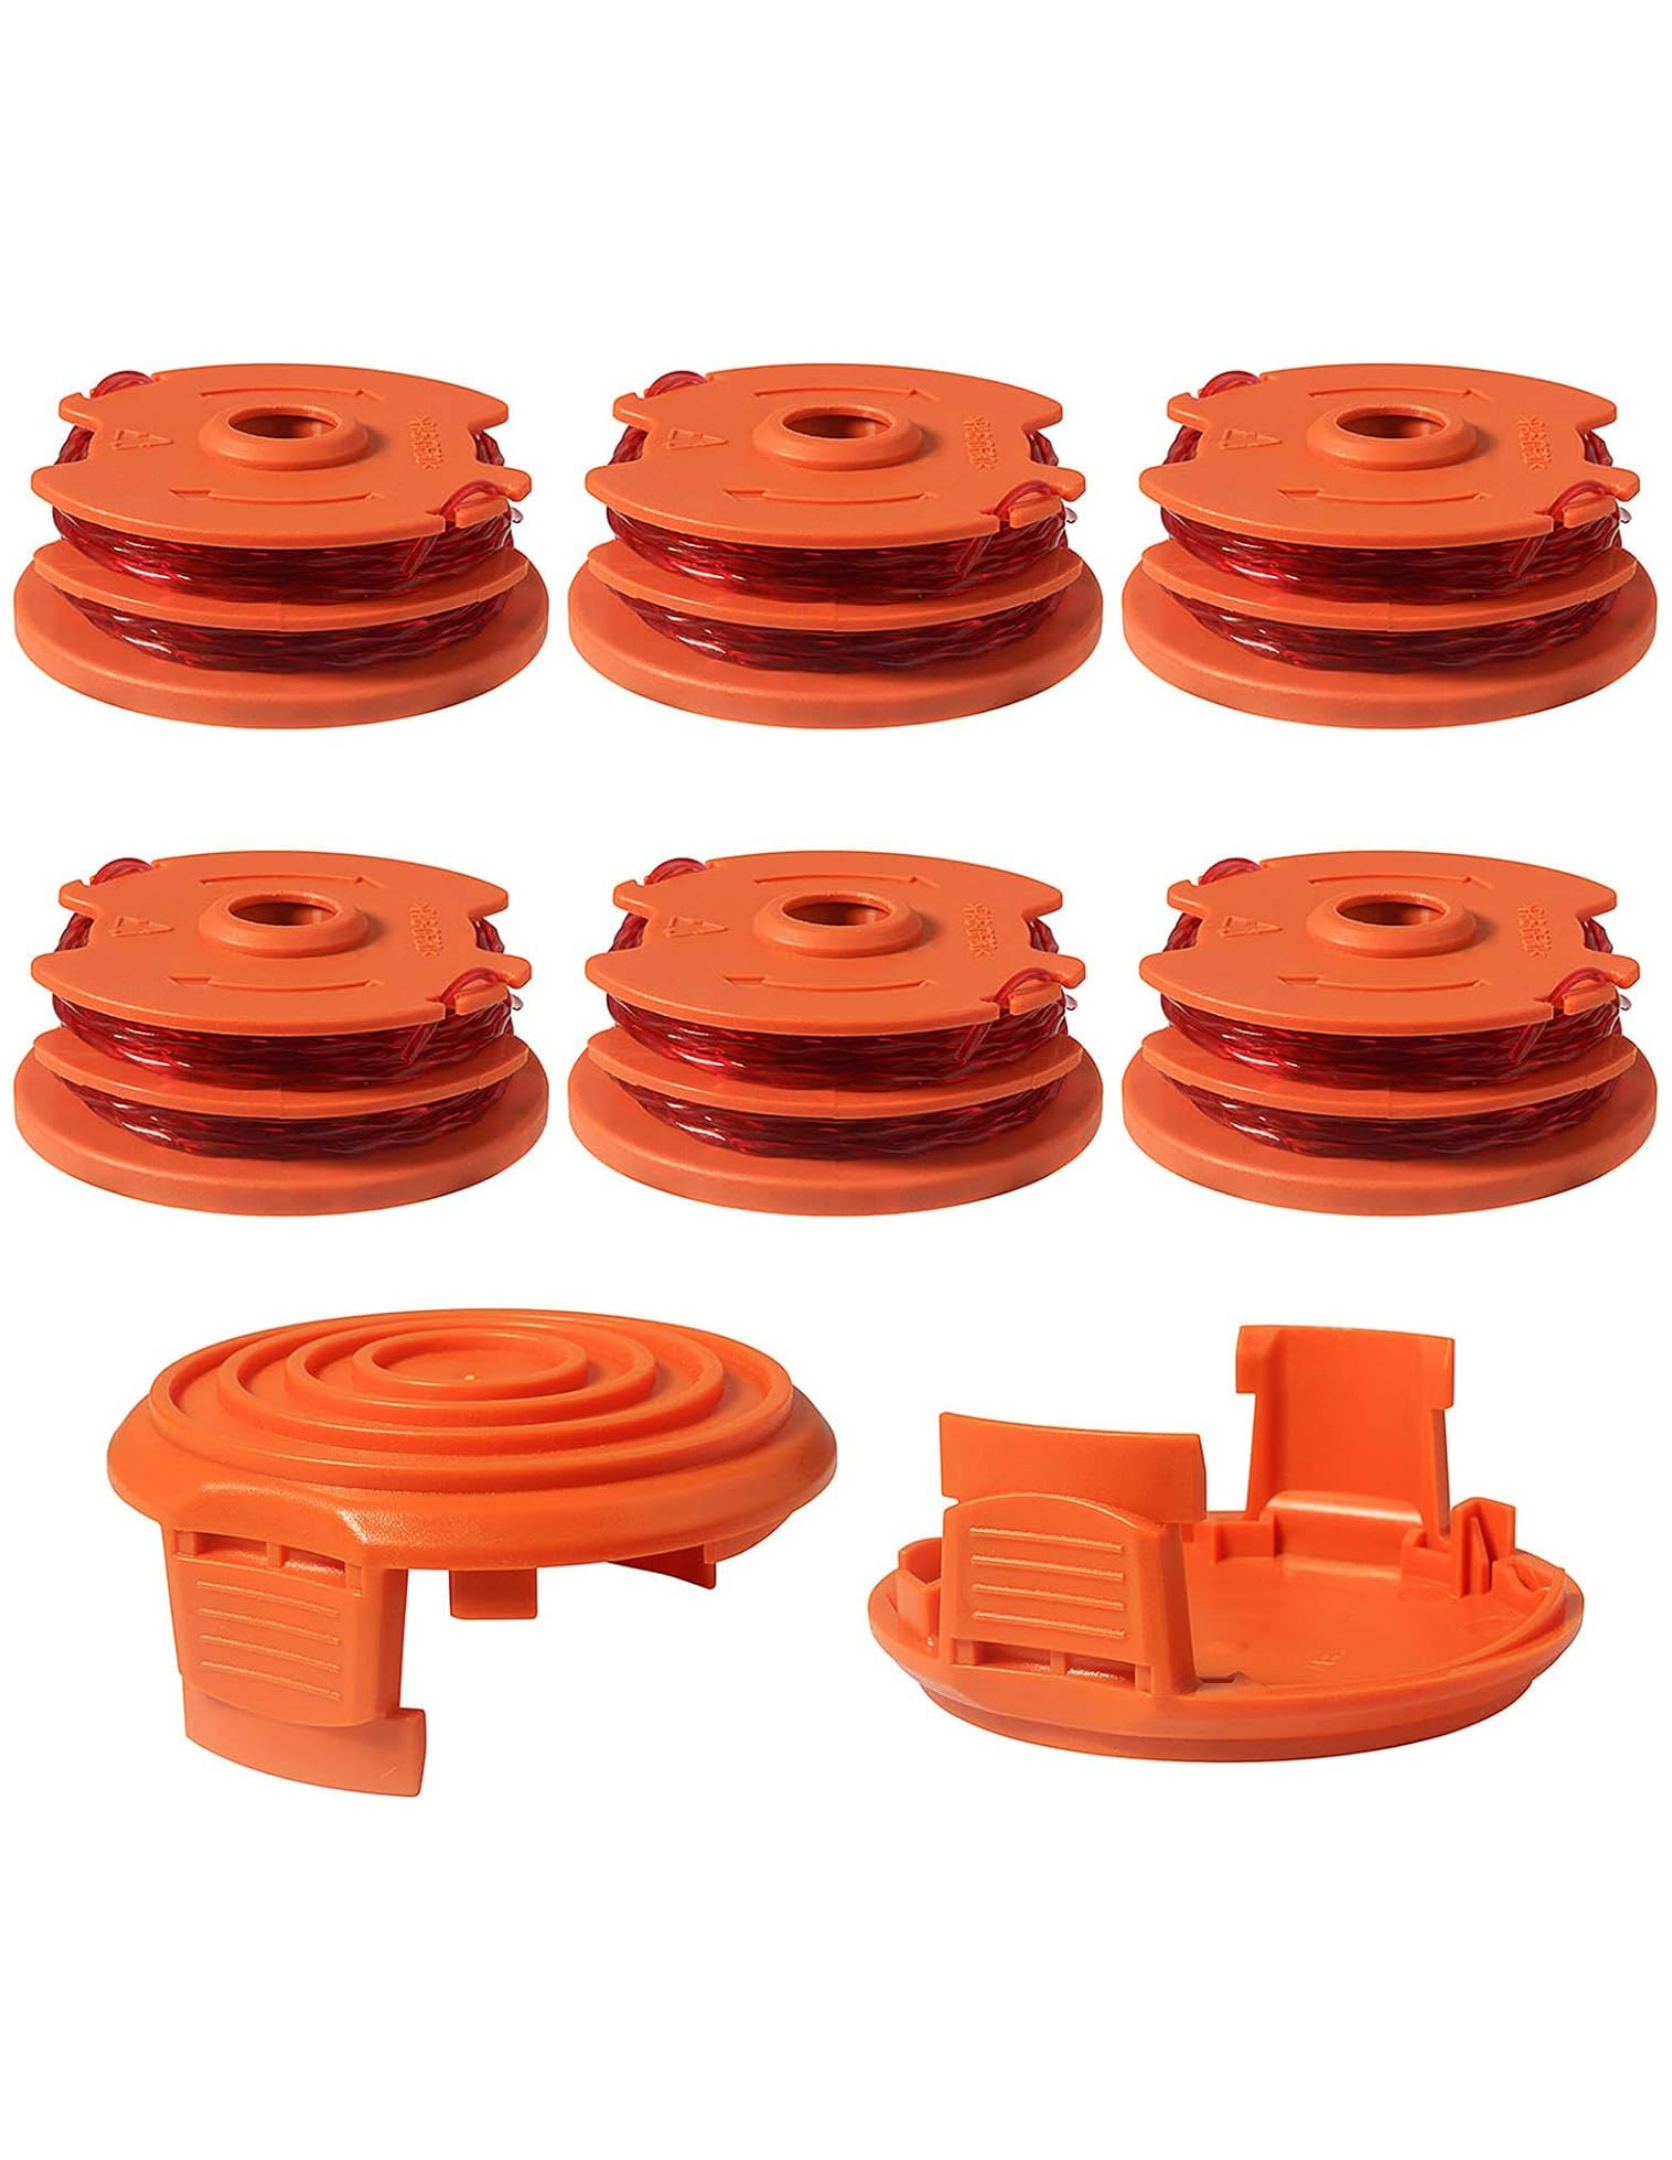 THTEN WA0007 Weed Eater Spool Replacement for Worx WG115 WG116 WG117 WG118 WG119 WG124 String Trimmer Edger Line Refills Parts Auto-Feed 2 x16ft 0.065" with 50019417 Spool Cap Covers